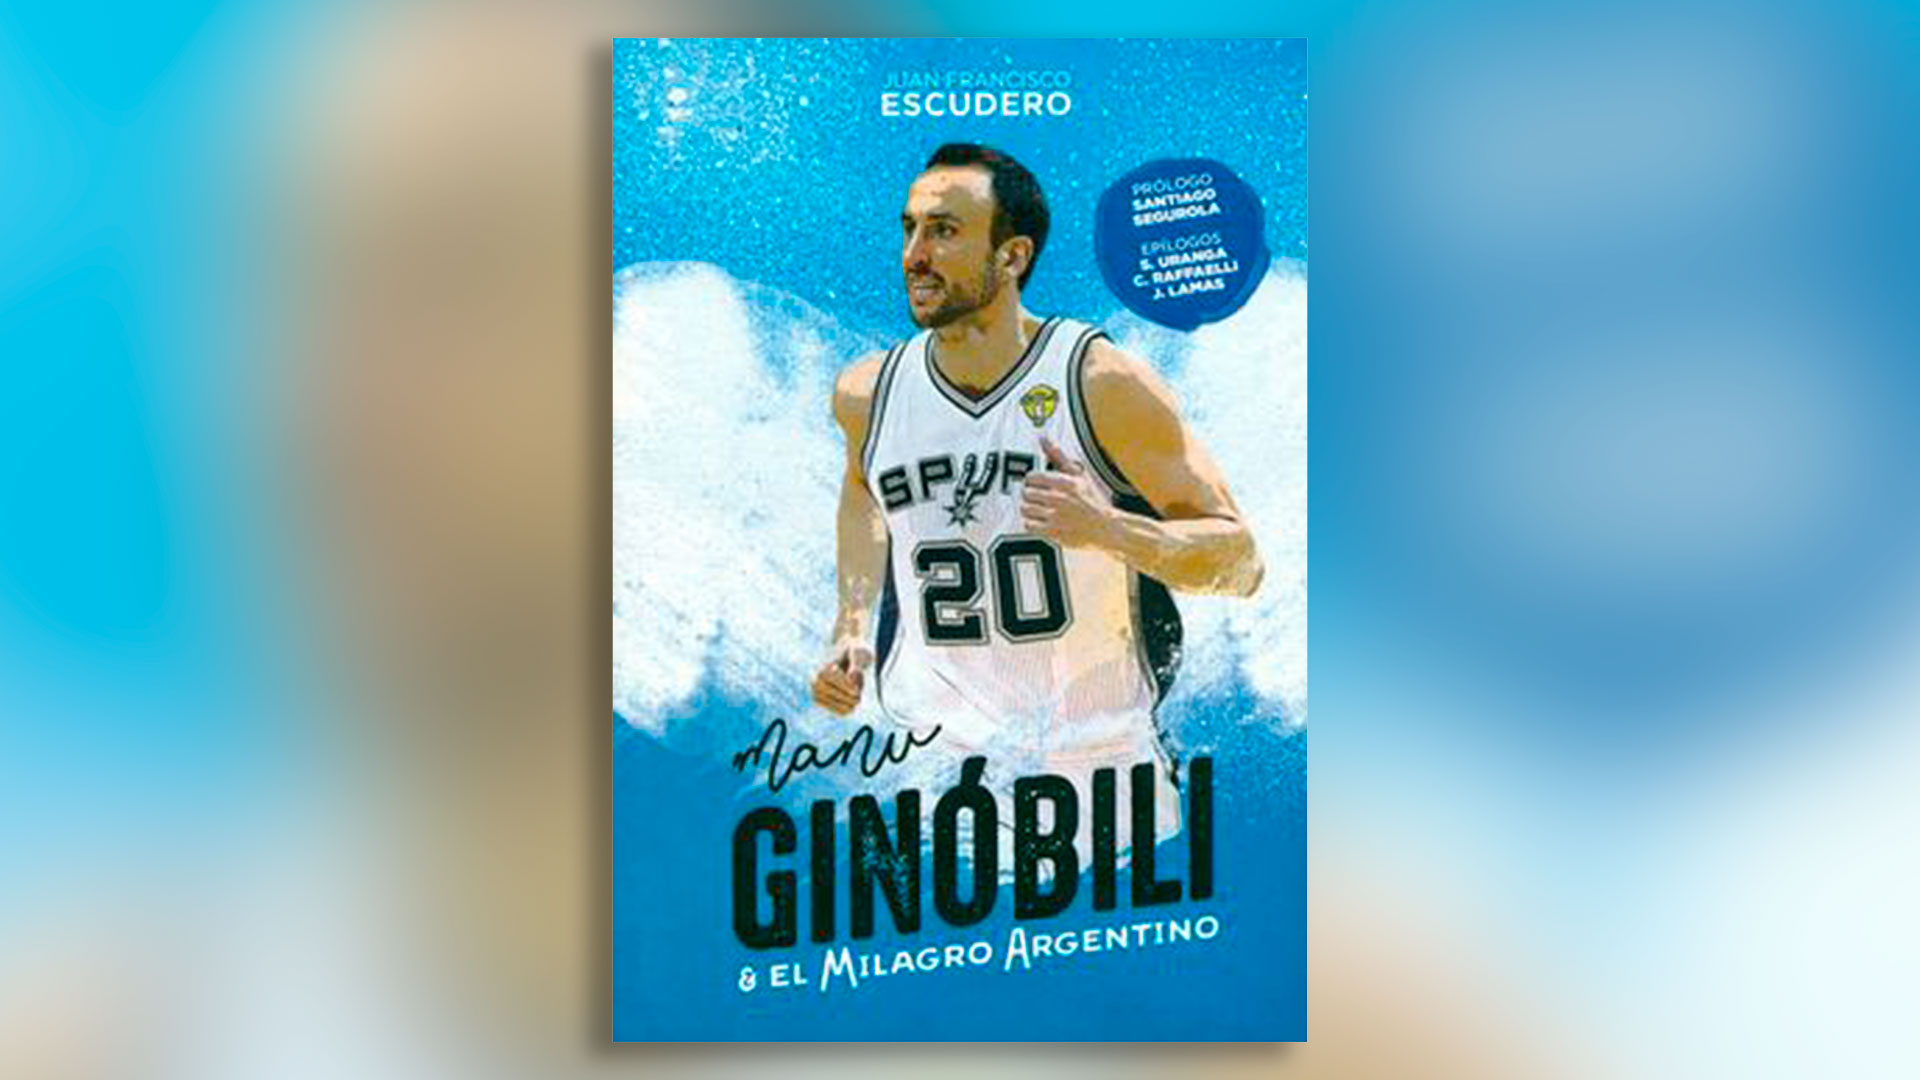 Manu Ginobili or the Argentine miracle, by Juan Francisco Escudero.